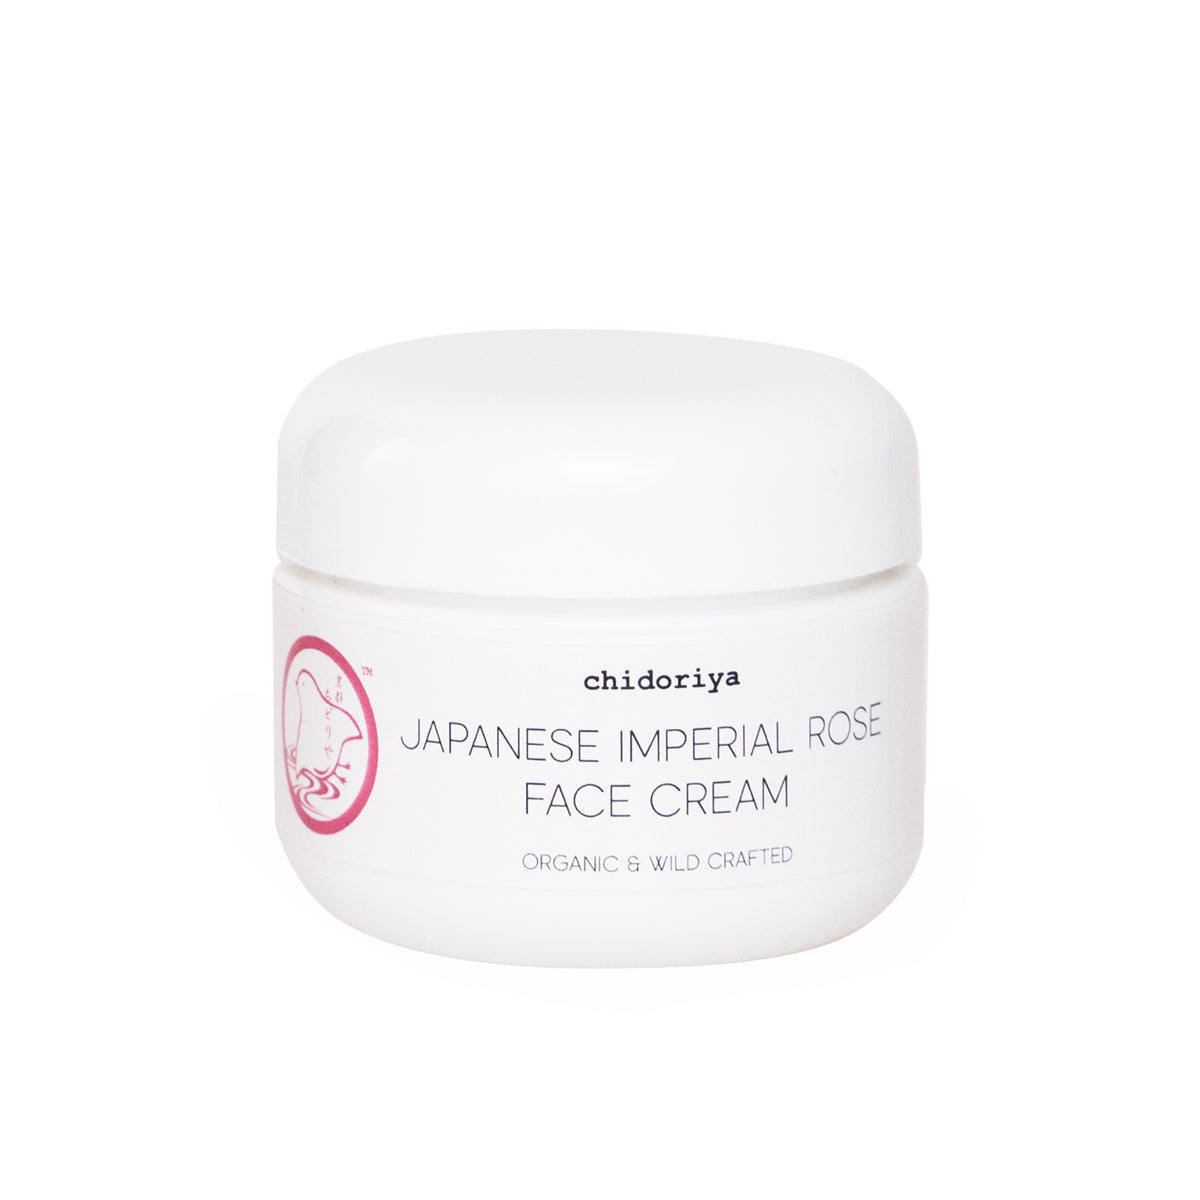 Primary image of Japanese Imperial Rose Face Cream